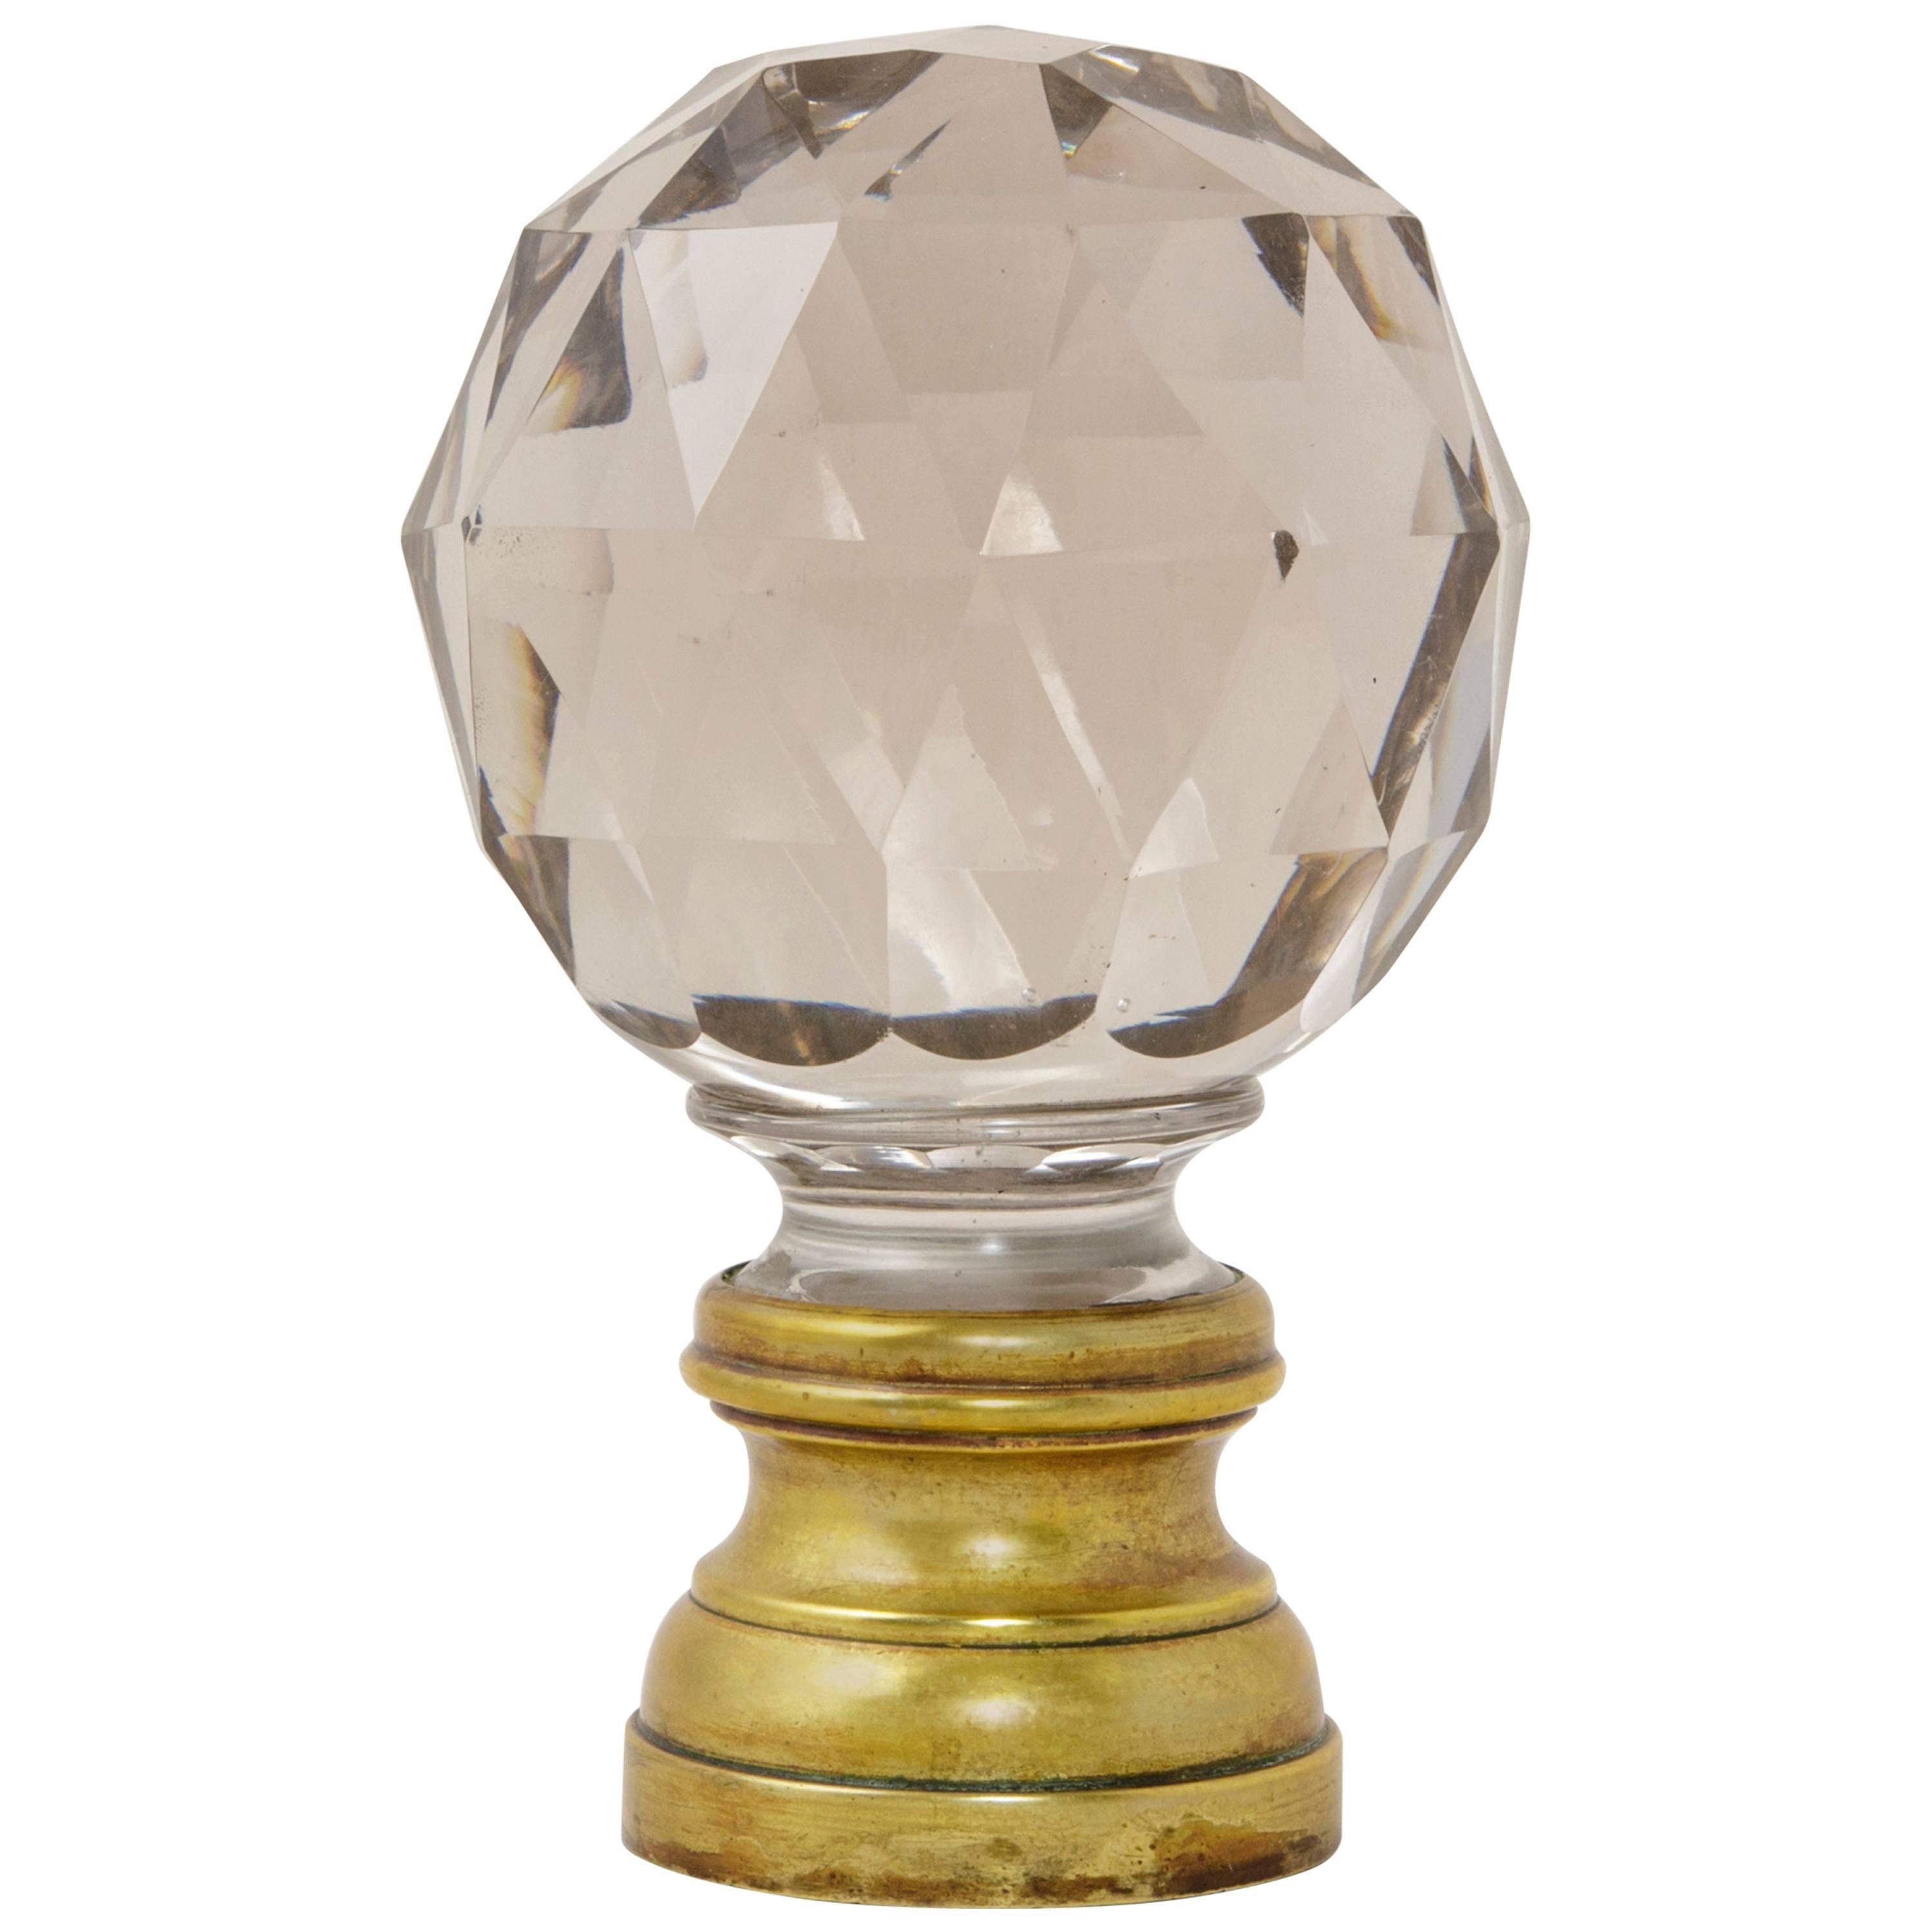 Antique French Baccarat Faceted Crystal Staircase Finial Ball